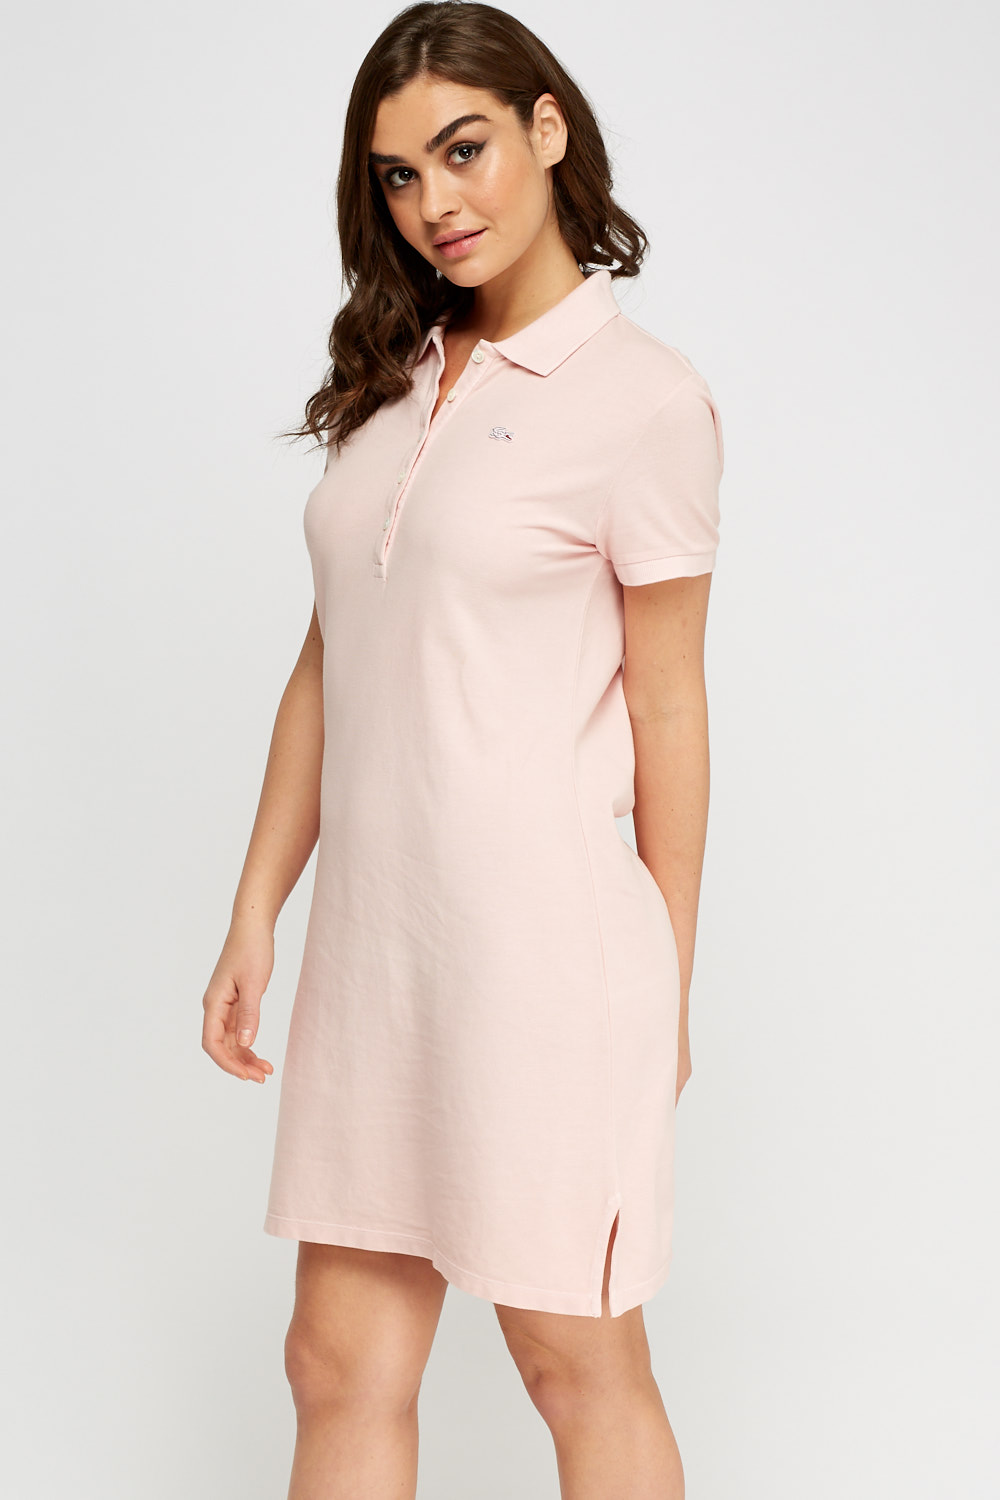 Lacoste Polo Shirt Dress - Limited edition | Discount Designer Stock